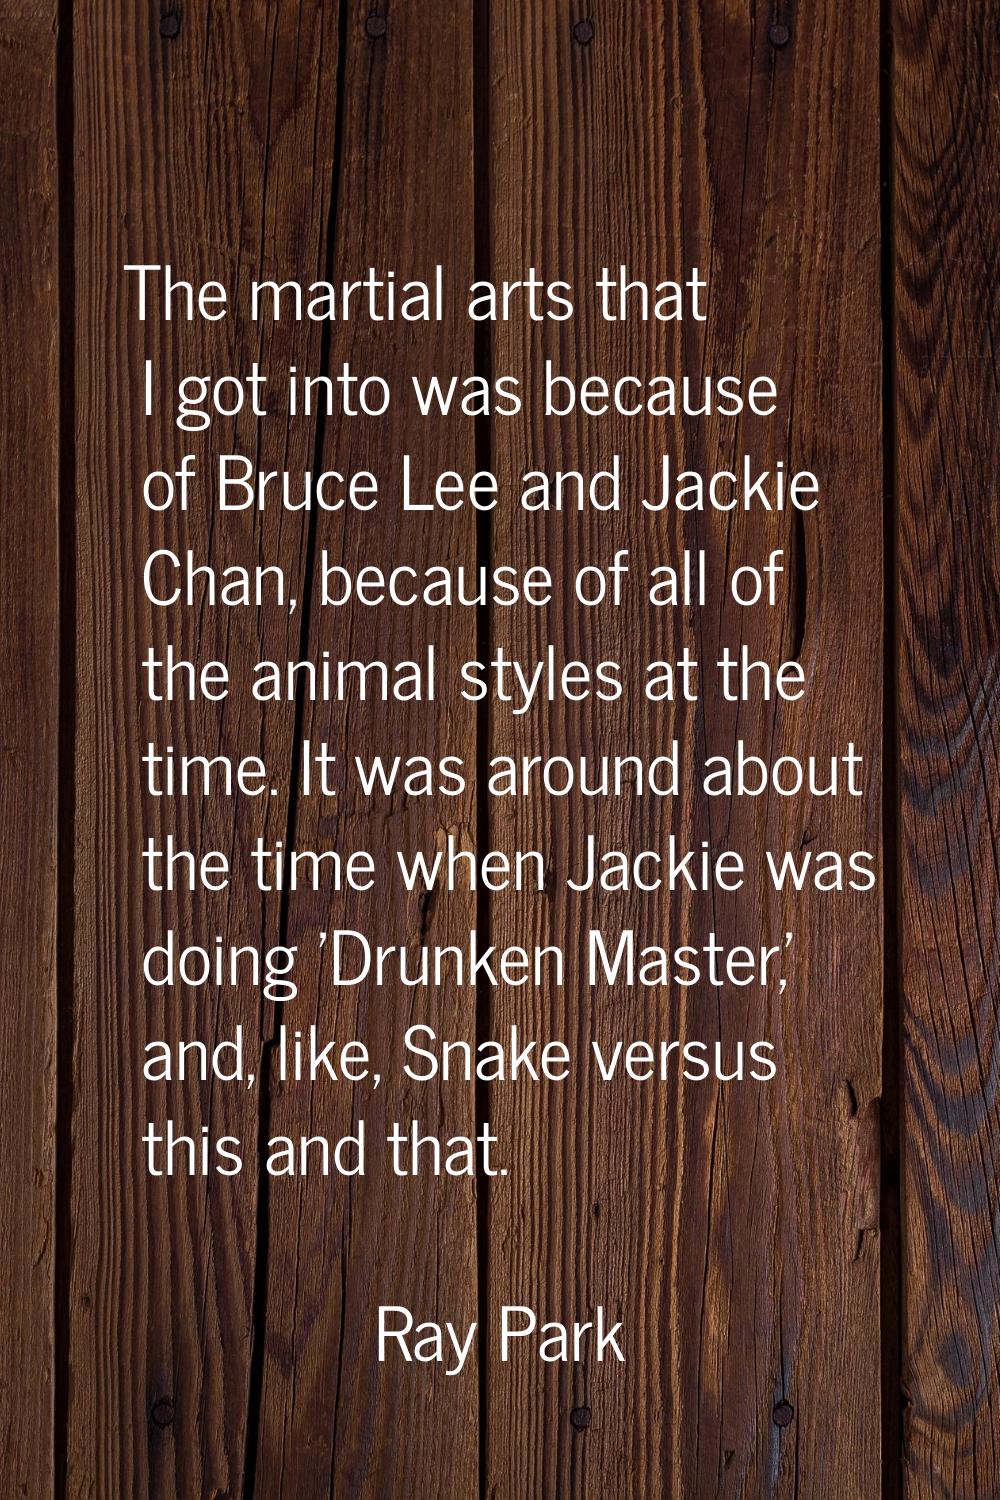 The martial arts that I got into was because of Bruce Lee and Jackie Chan, because of all of the an